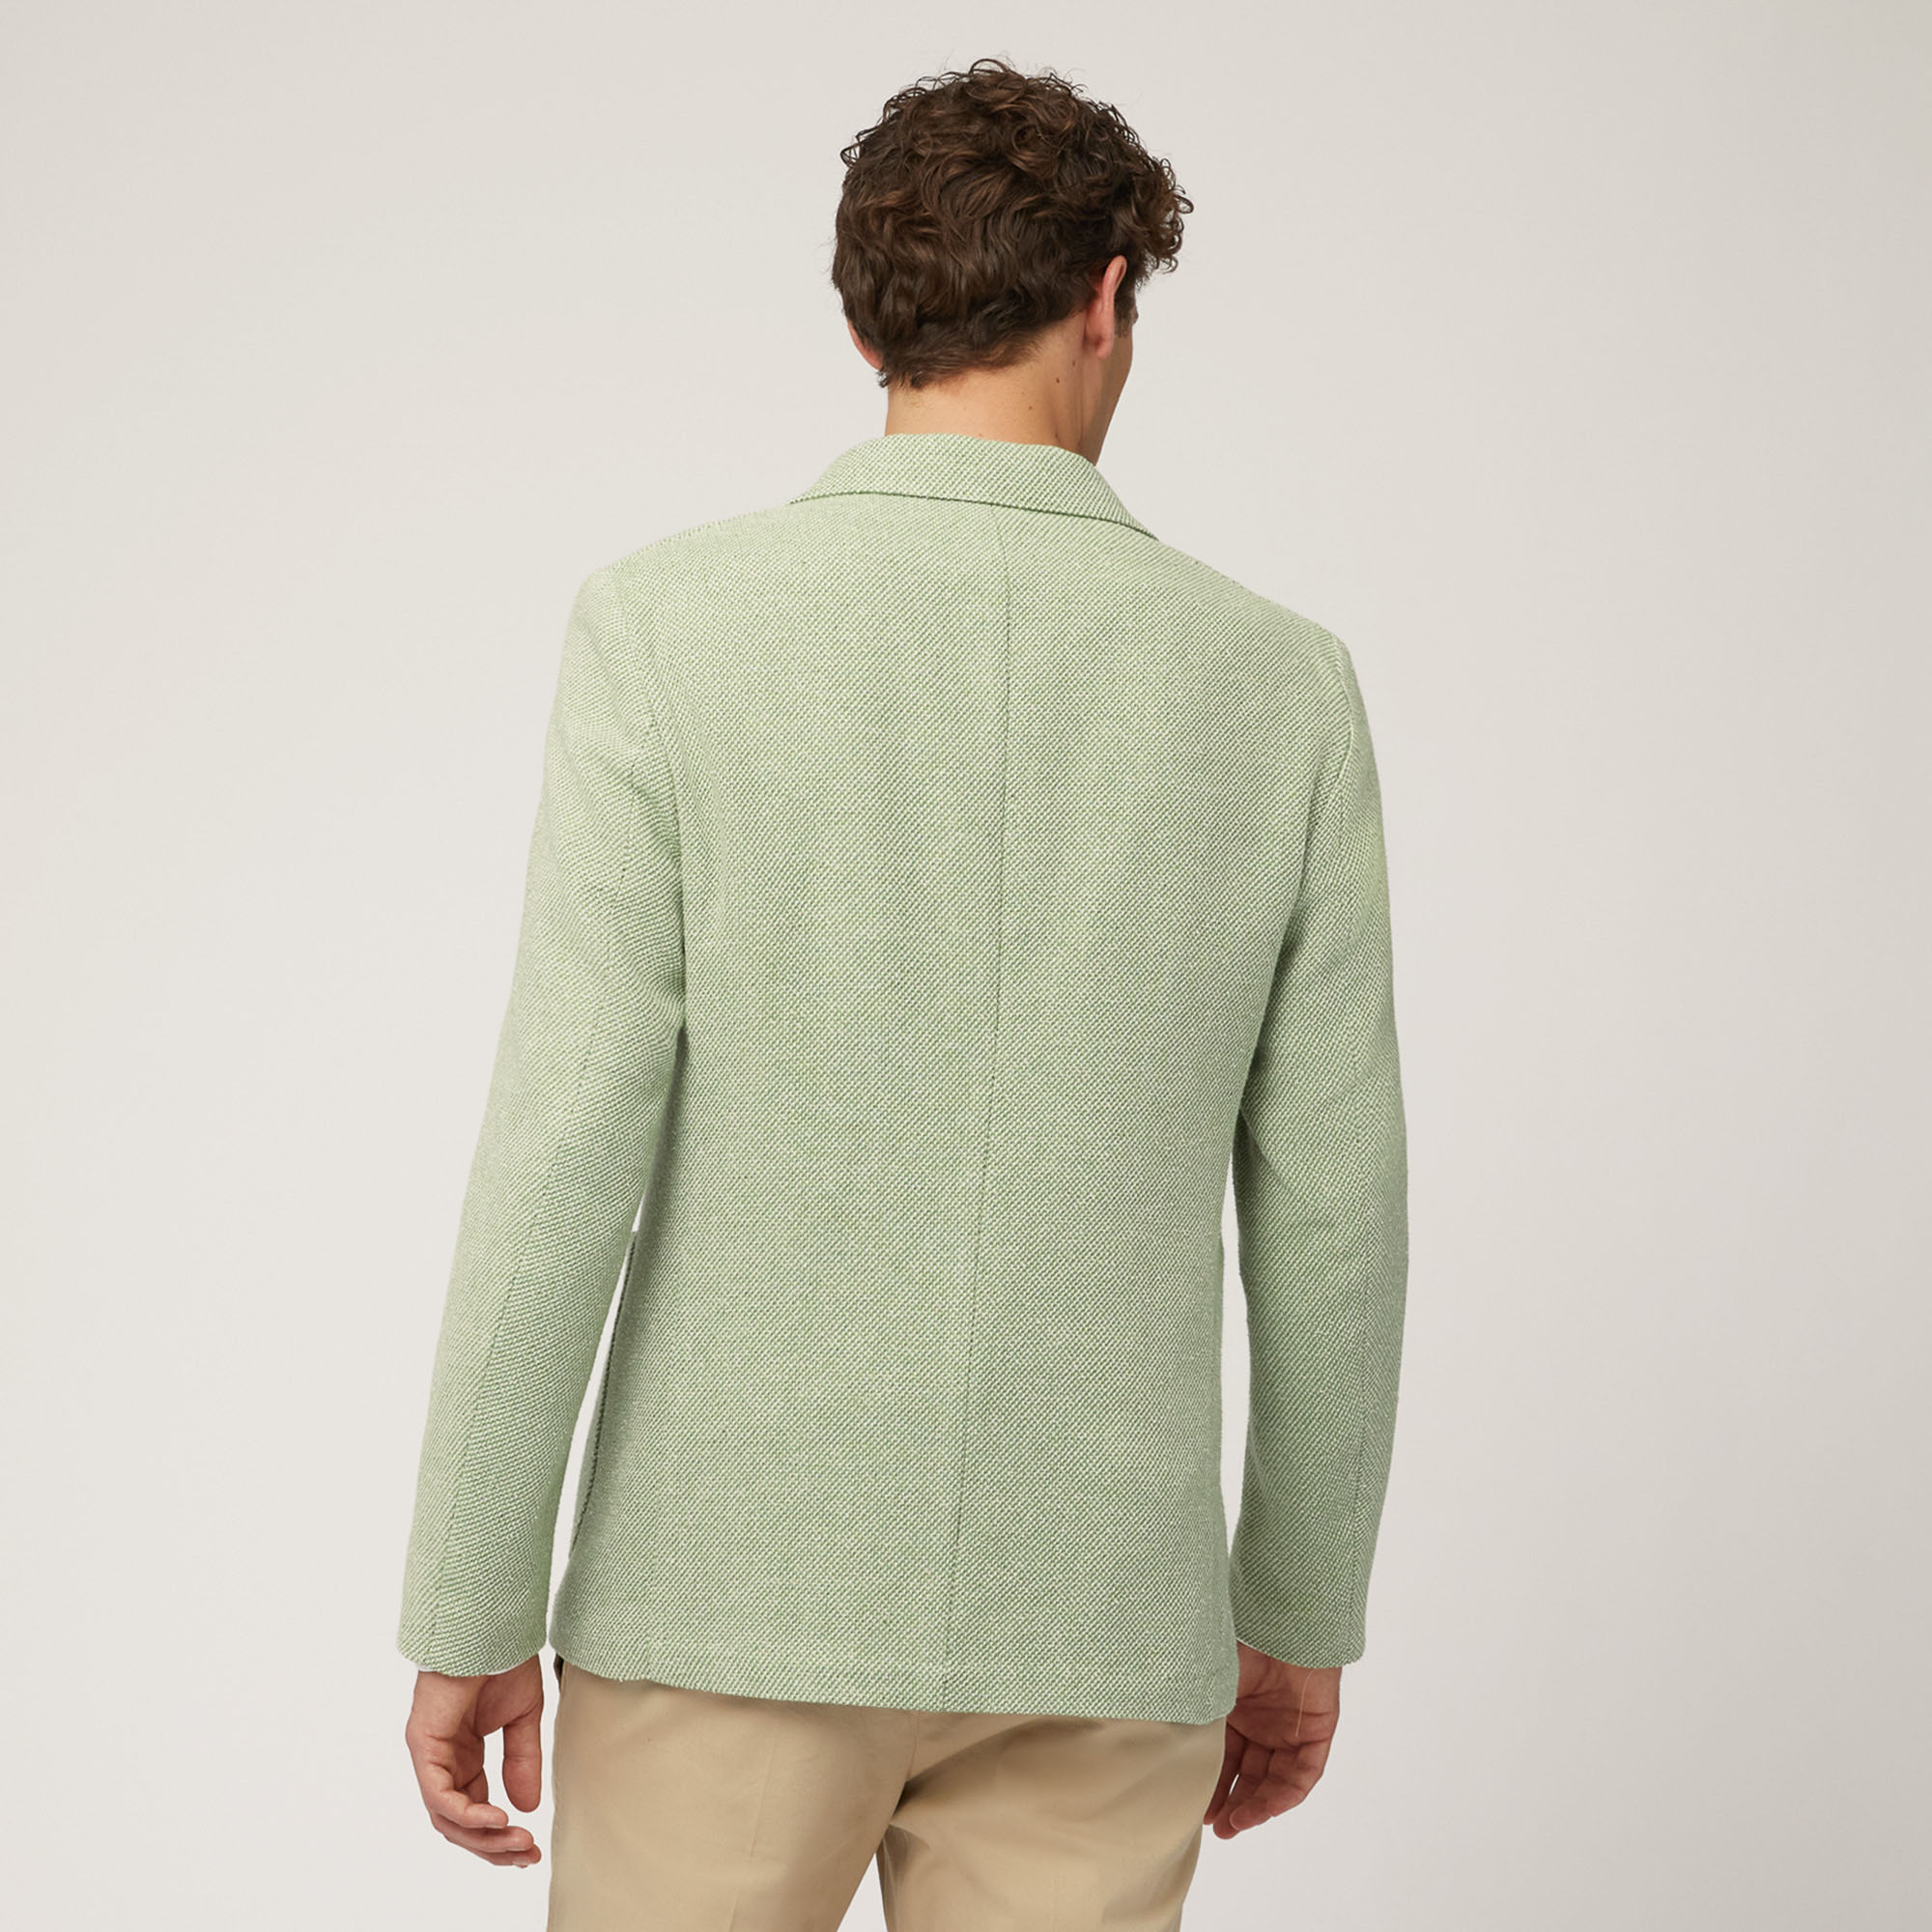 Cotton and Linen Jacket with Pockets and Breast Pocket